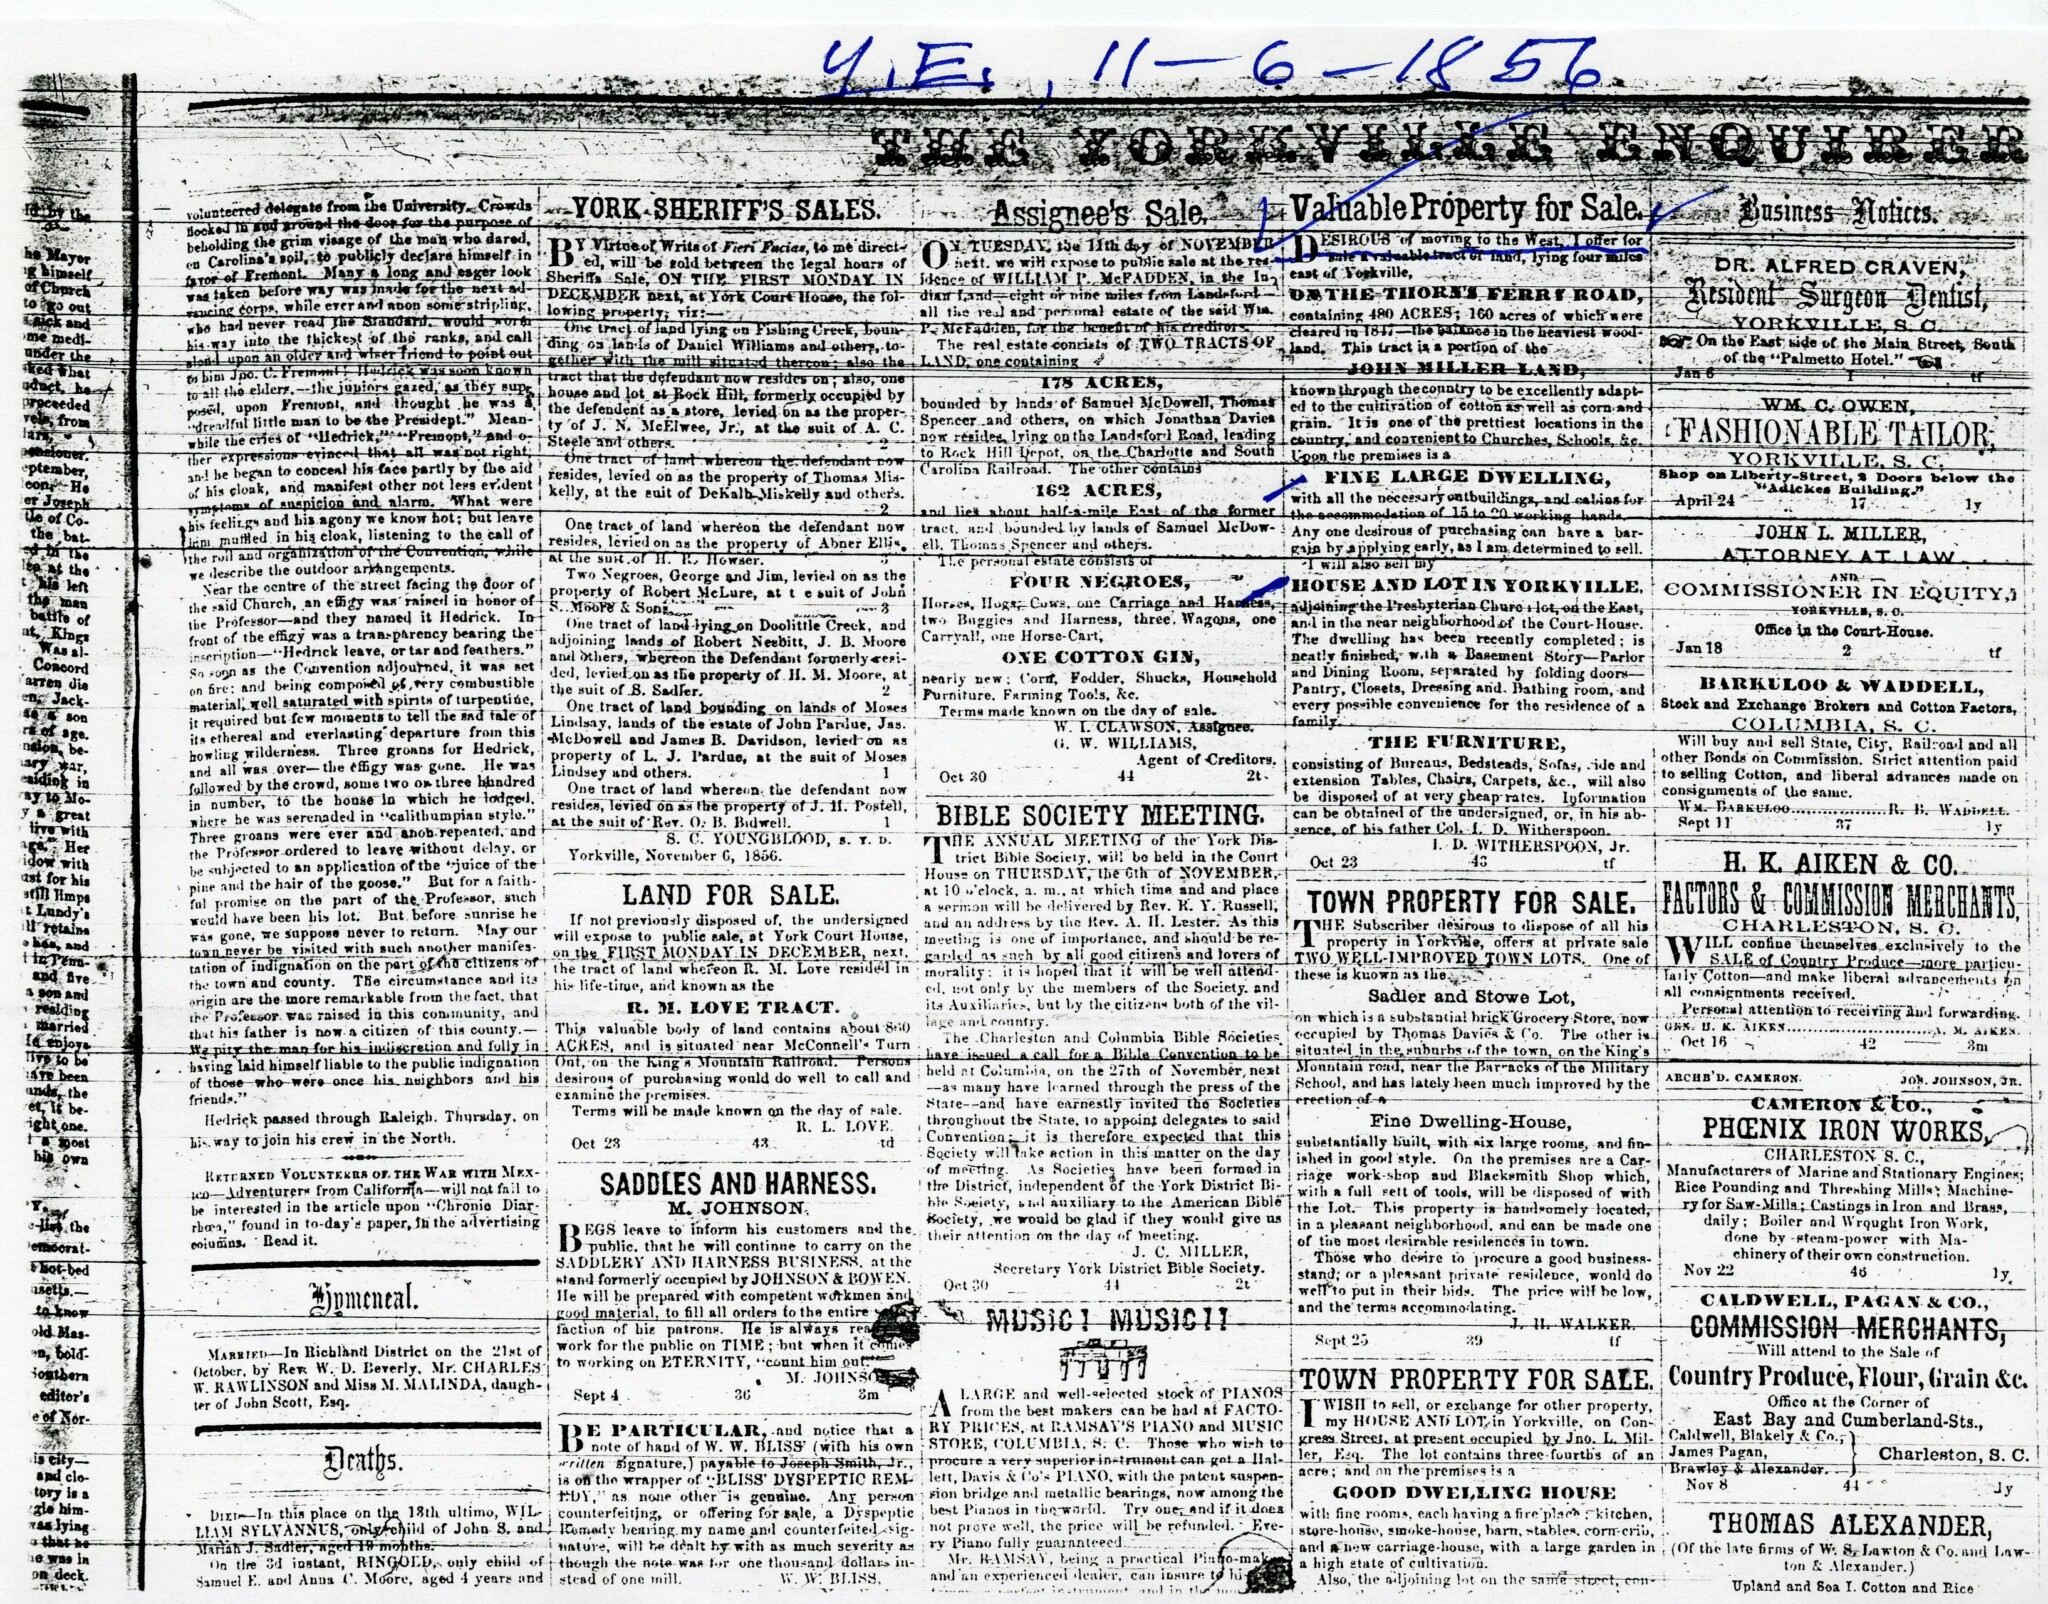 Sale of the estate of William P. McFadden of Indian Land - 1856